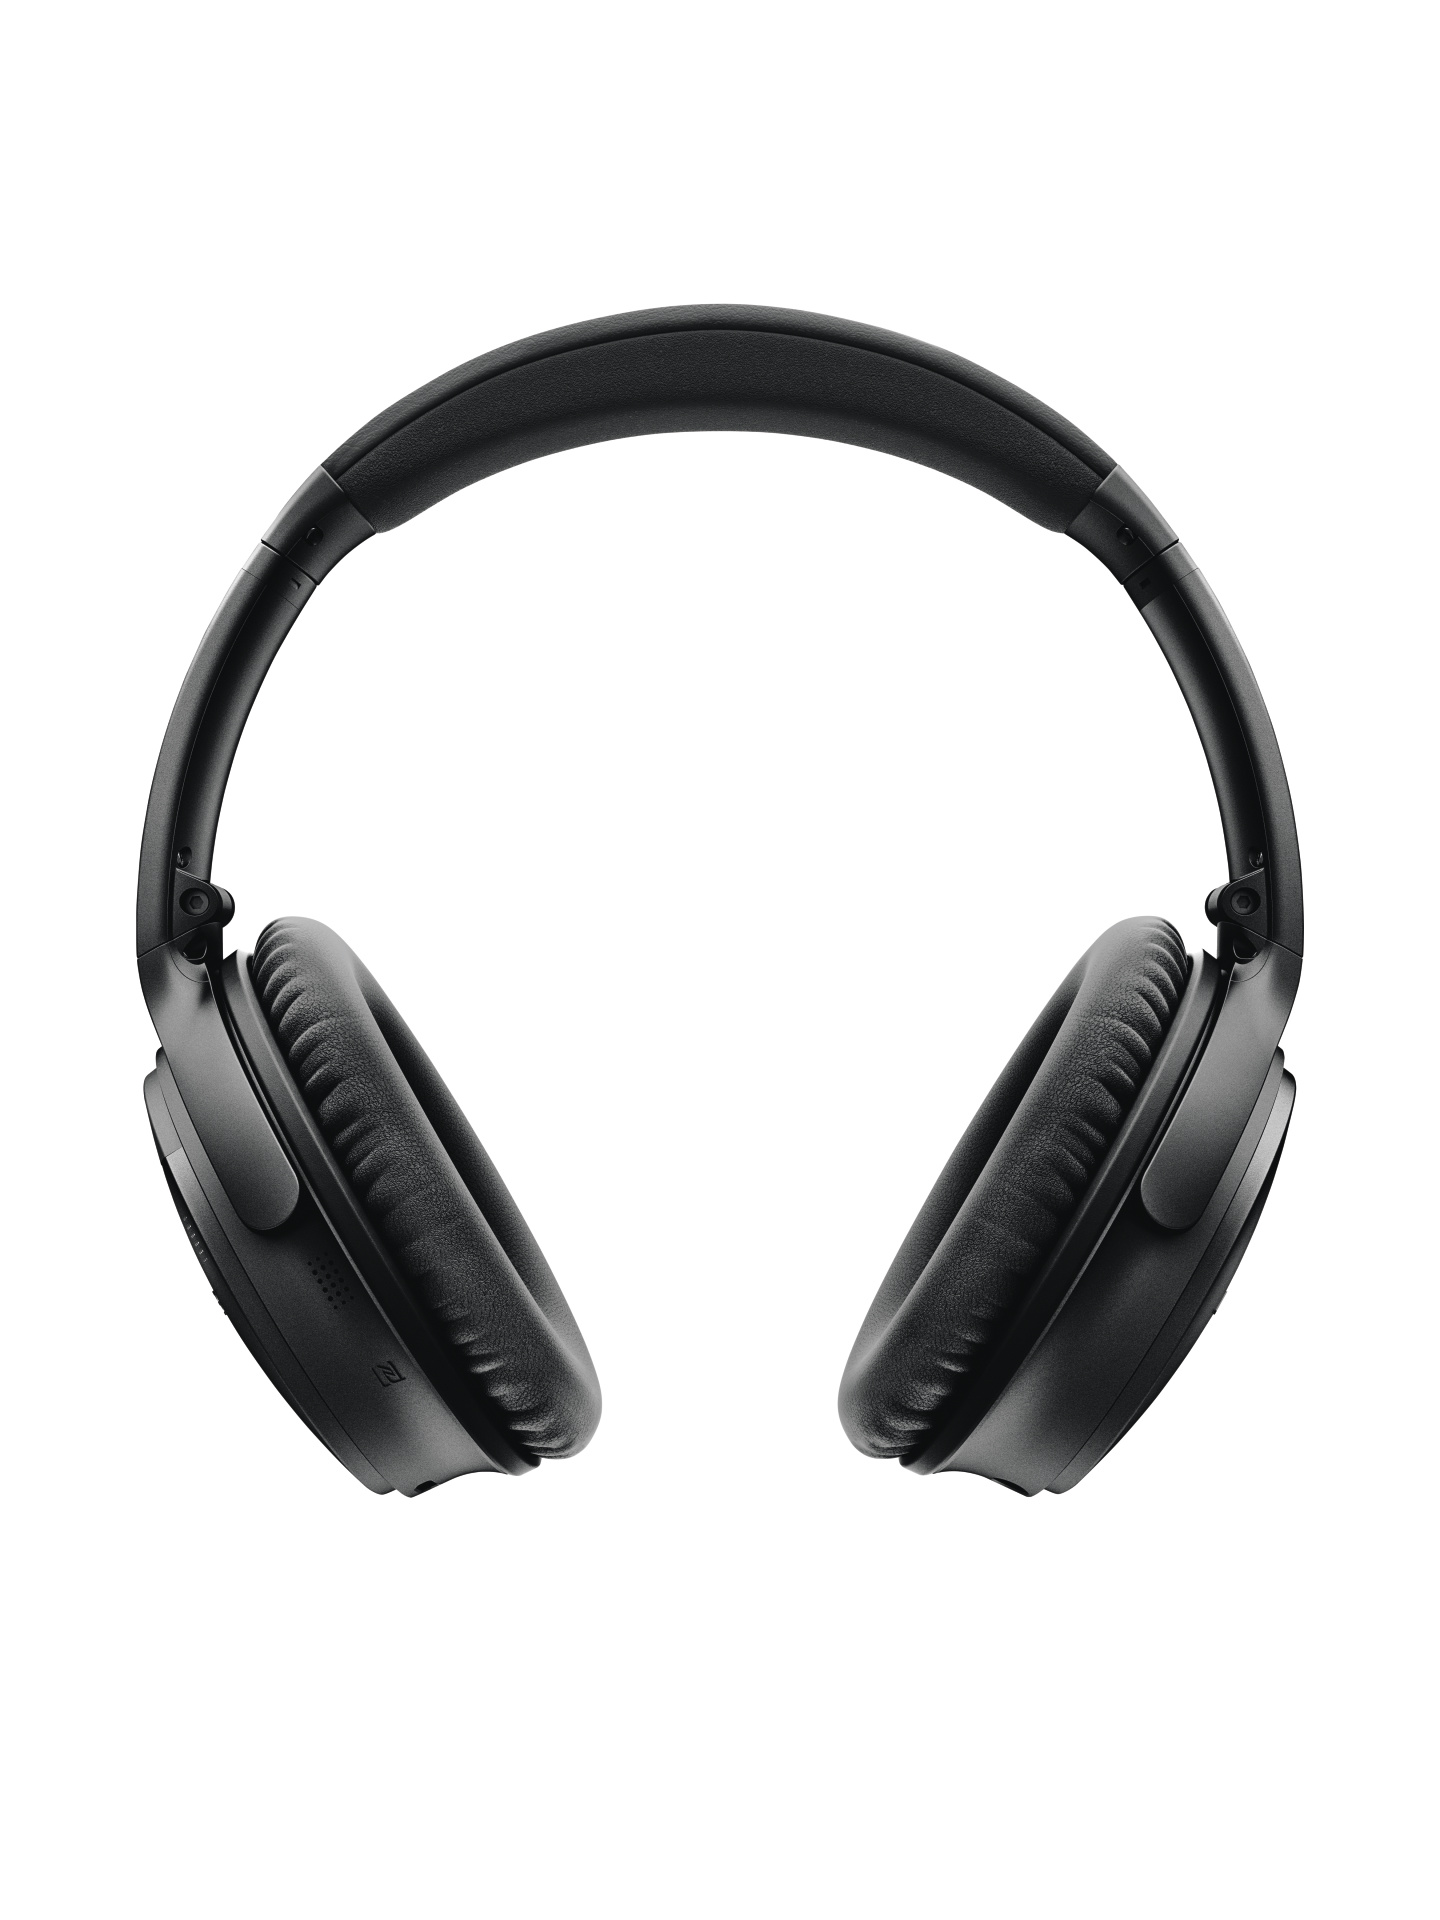 Bose QuietComfort 35 Noise Cancelling Bluetooth Over-Ear Wireless Headphones, Black - image 5 of 8